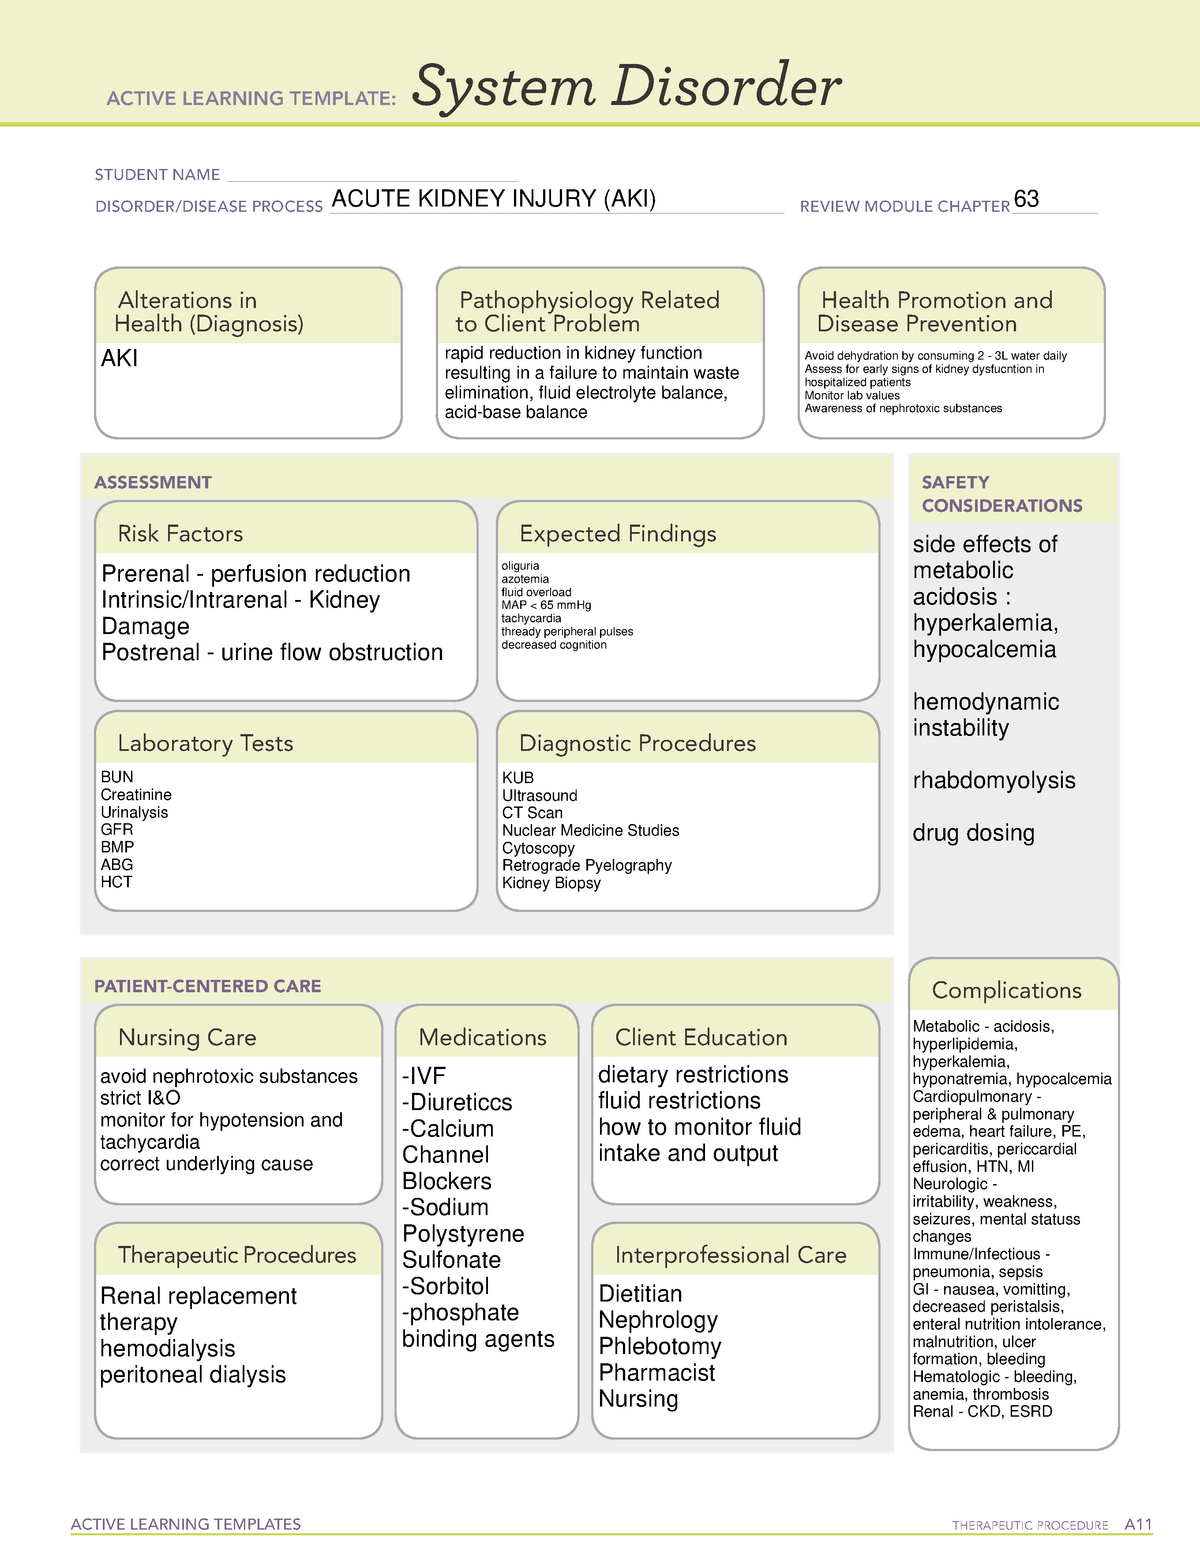 Acute Kidney Injury ATI Template ACTIVE LEARNING TEMPLATES